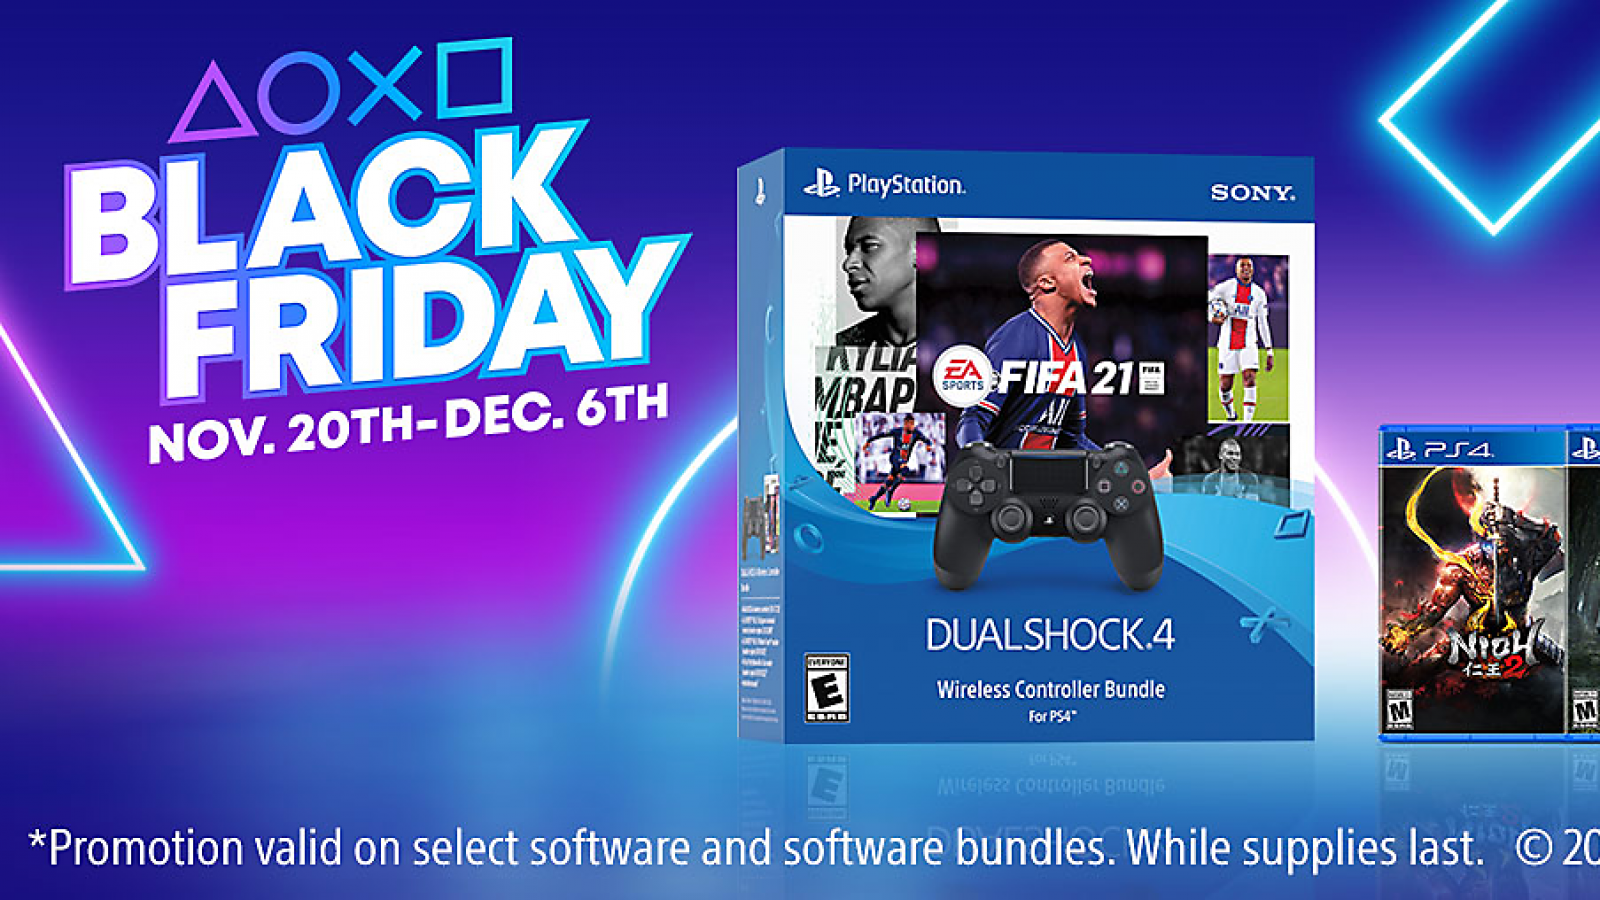 PlayStation launches Black Friday sale - save up to 80% on AAA